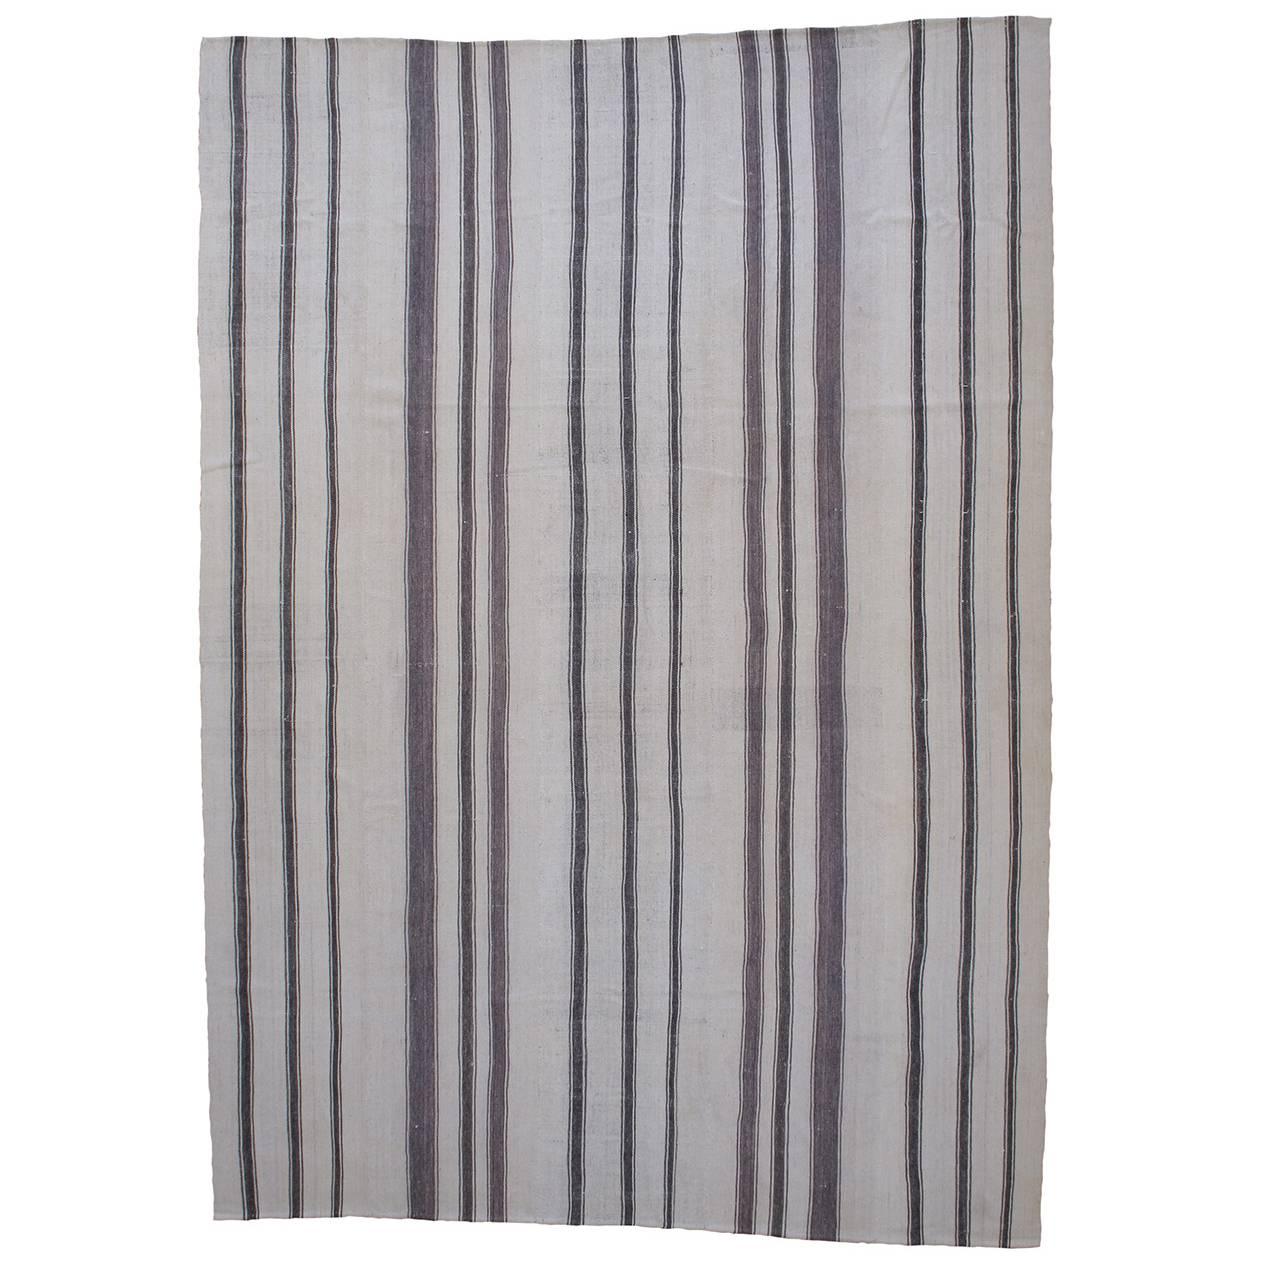 Large Kilim with Vertical Stripes